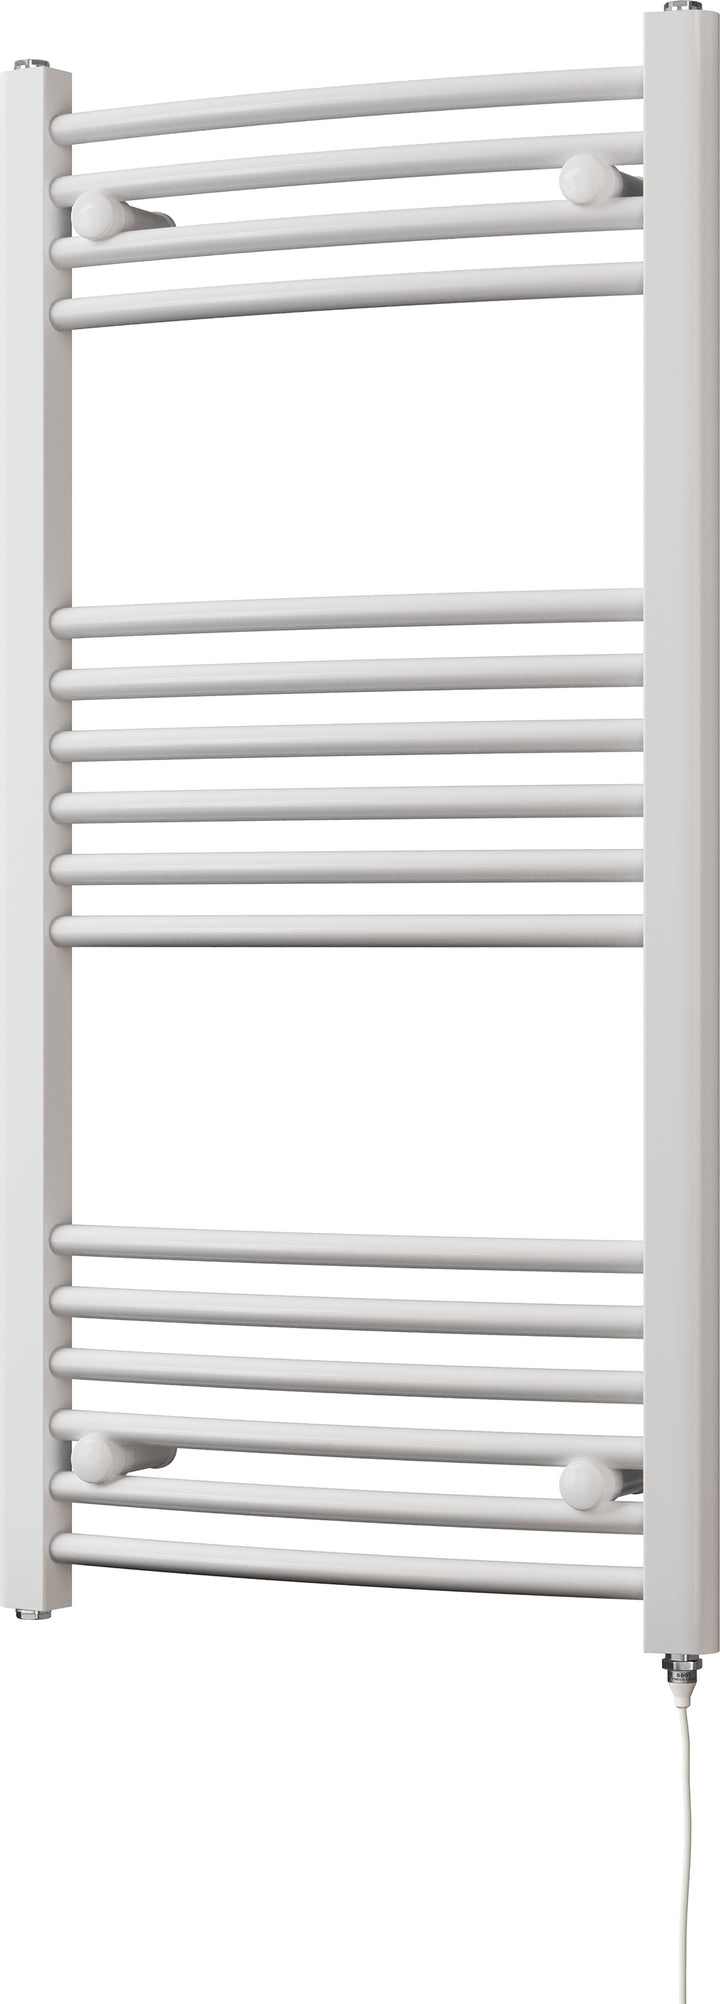 Zennor - White Electric Towel Rail H1000mm x W500mm Curved 300w Standard